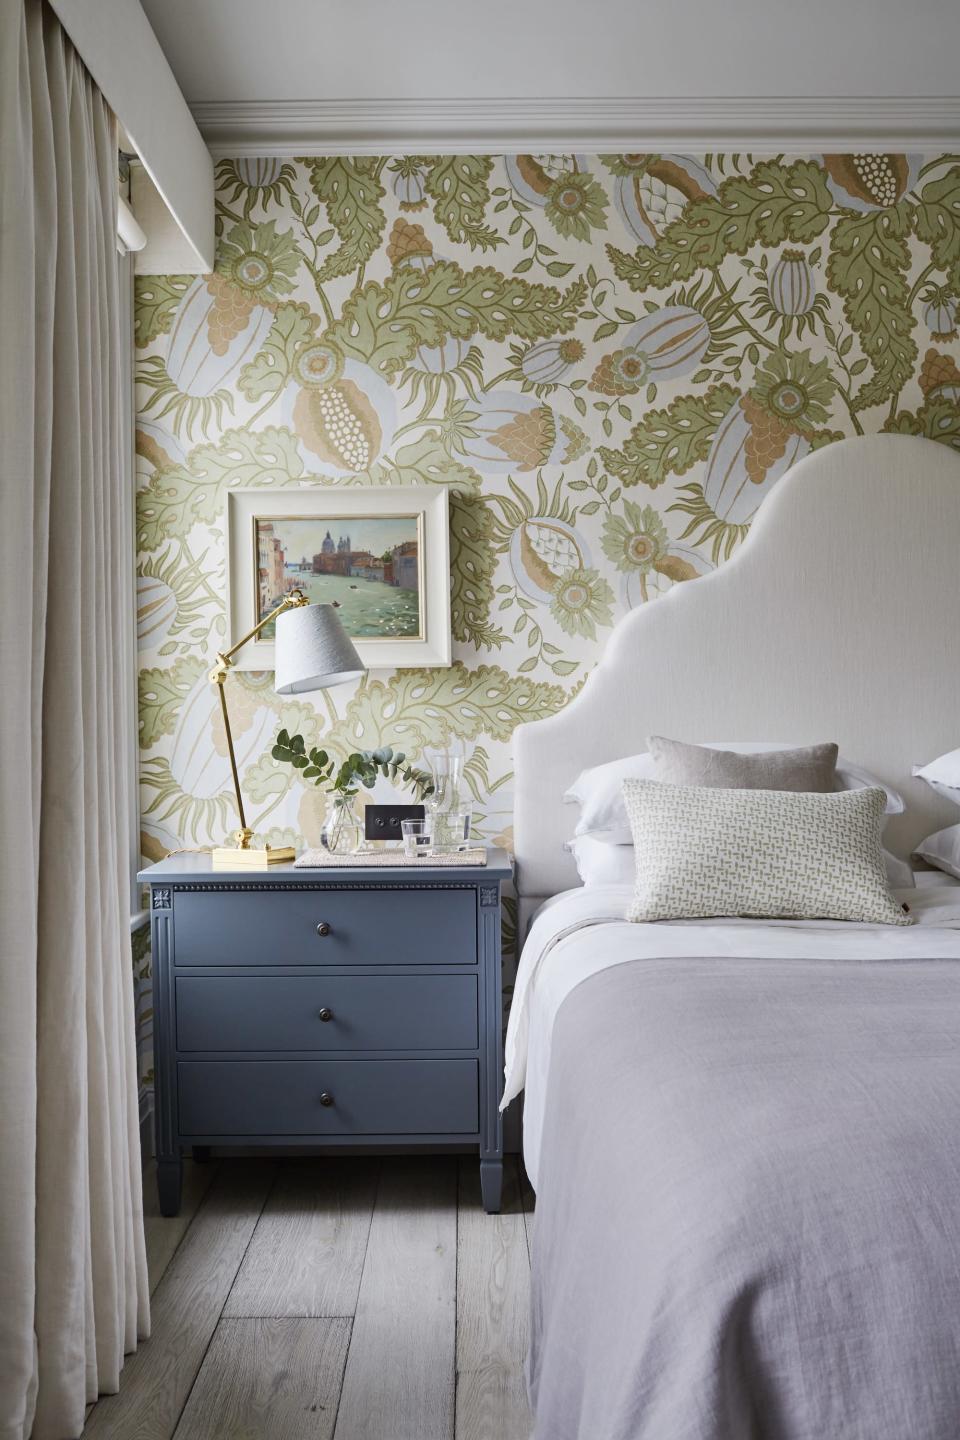 <p> If you want to give your home a modern farmhouse or country style, try to avoid blasts of neon or out-there animal prints. </p> <p> Take a leaf out of Emma Sims-Hilditch&apos;s design book. She says: &apos;At&#xA0;Sims Hilditch&#xA0;we aim to create interiors that are timeless, elegant, and built to last. For this reason, we usually try to steer clear of neon, or excessive animal print.&apos; </p>